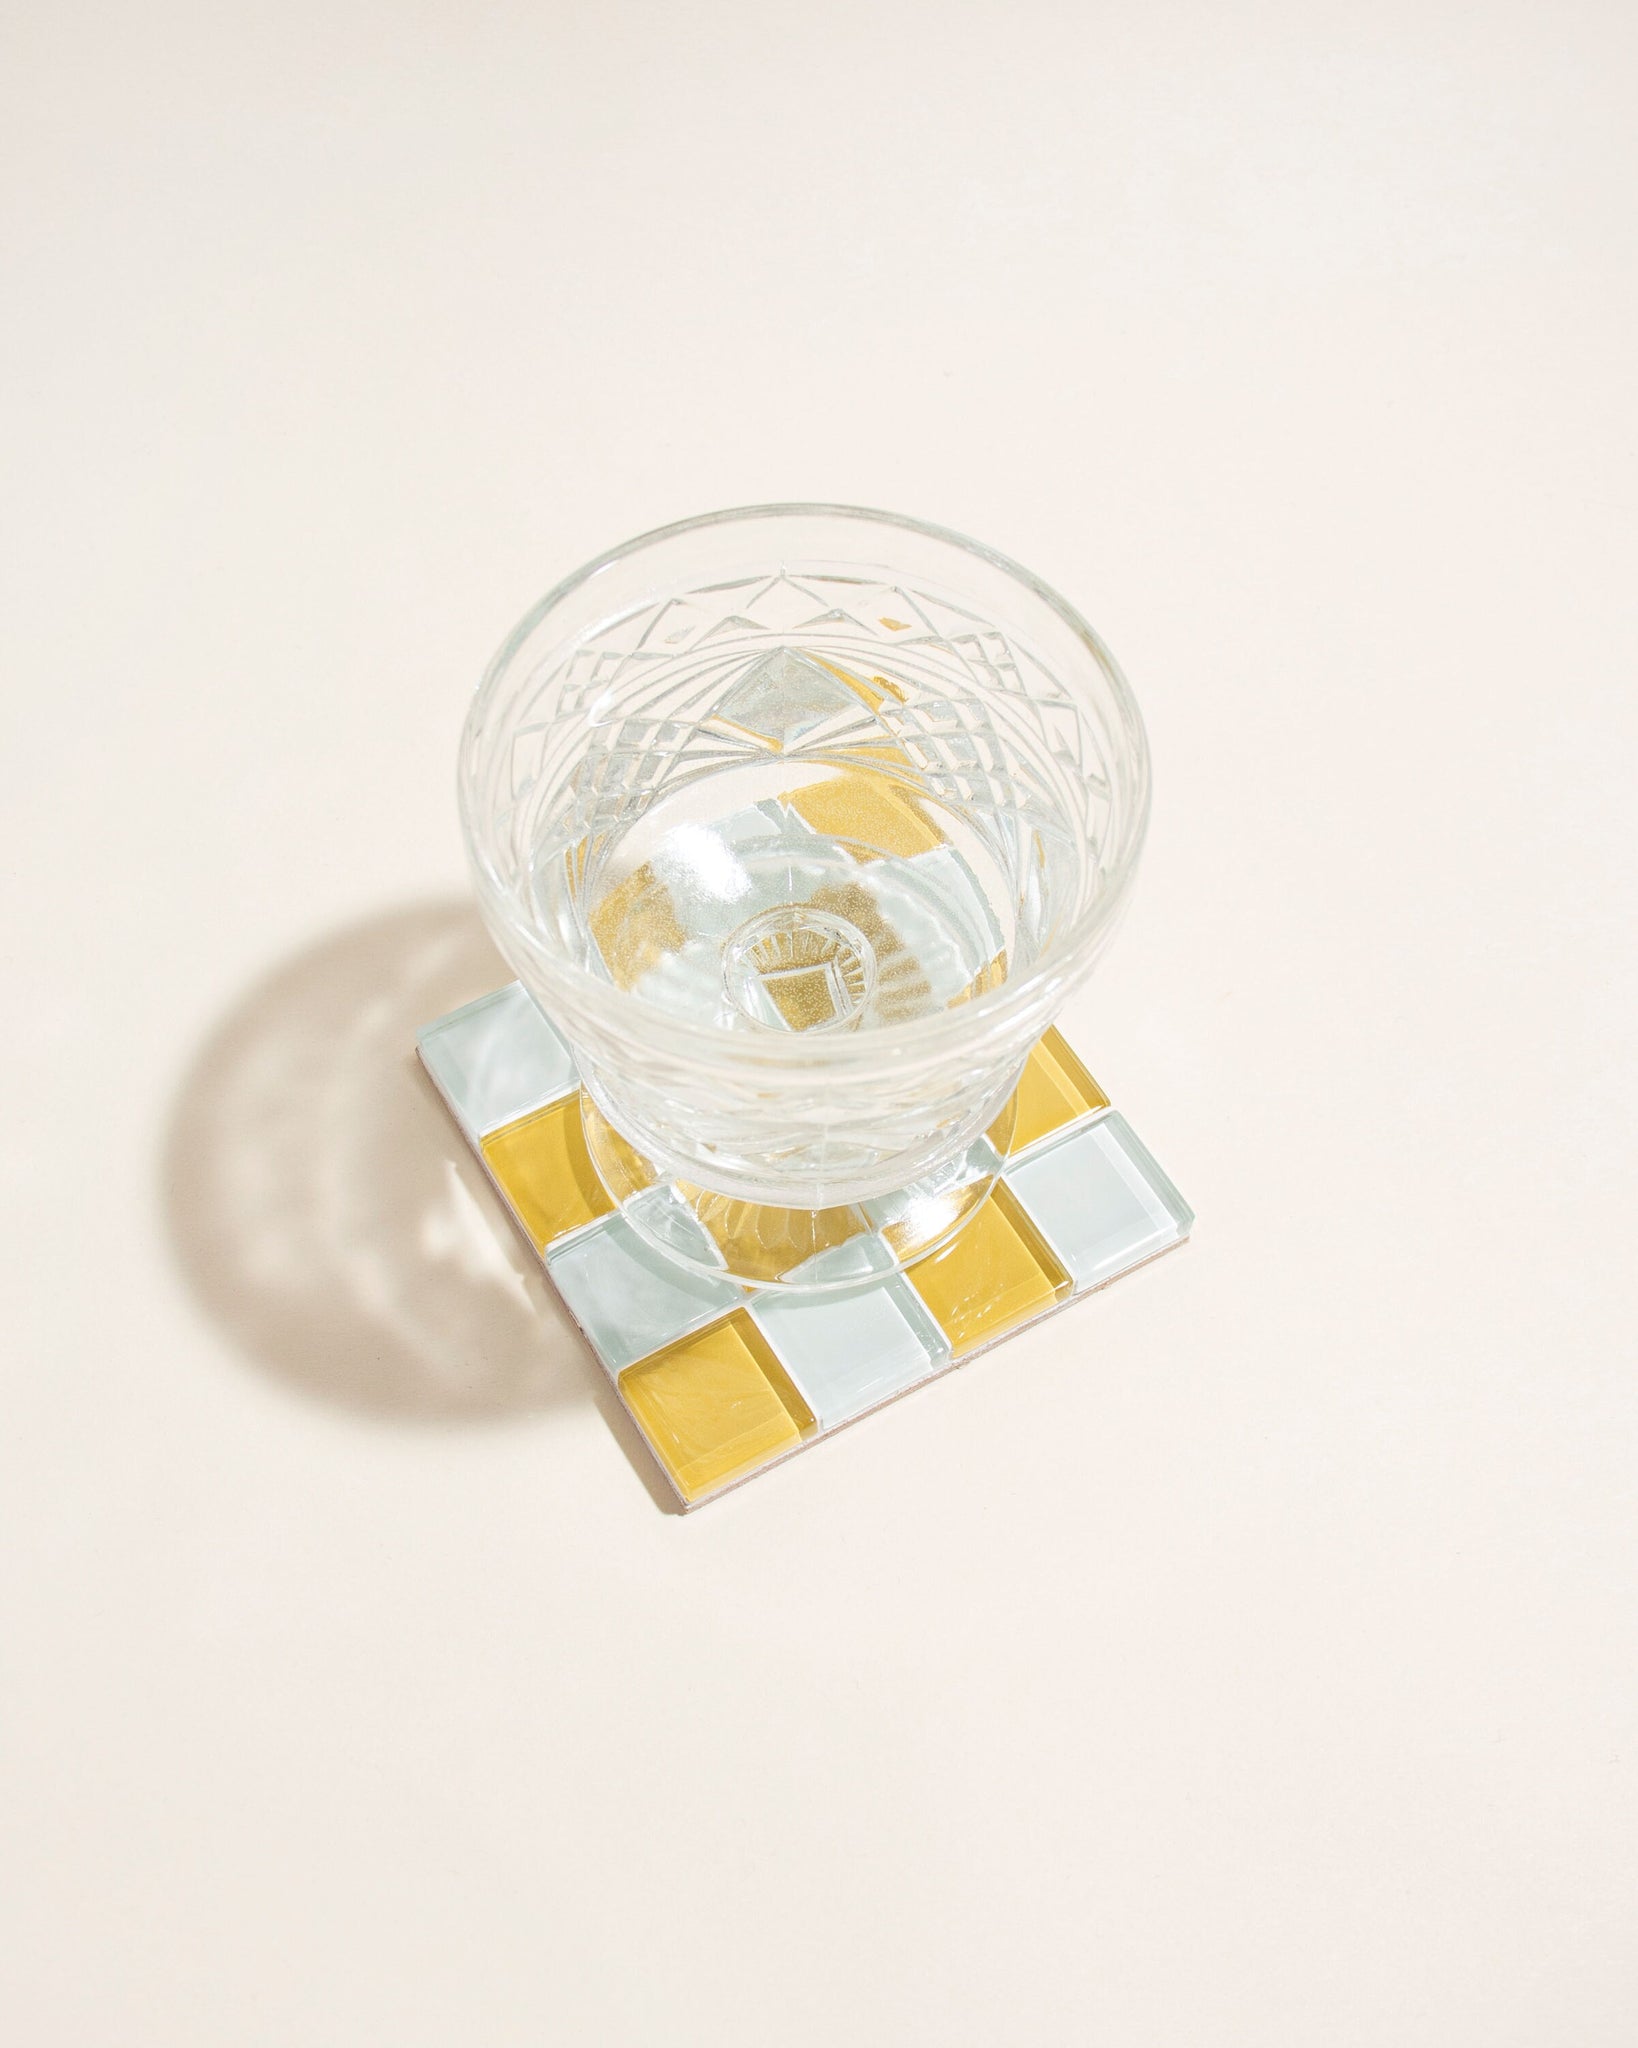 Glass Tile Coaster | Handmade Drink Coaster | Square Coaster | Housewarming Gift | Gift for Her | Birthday Gifts | Gift for Him |